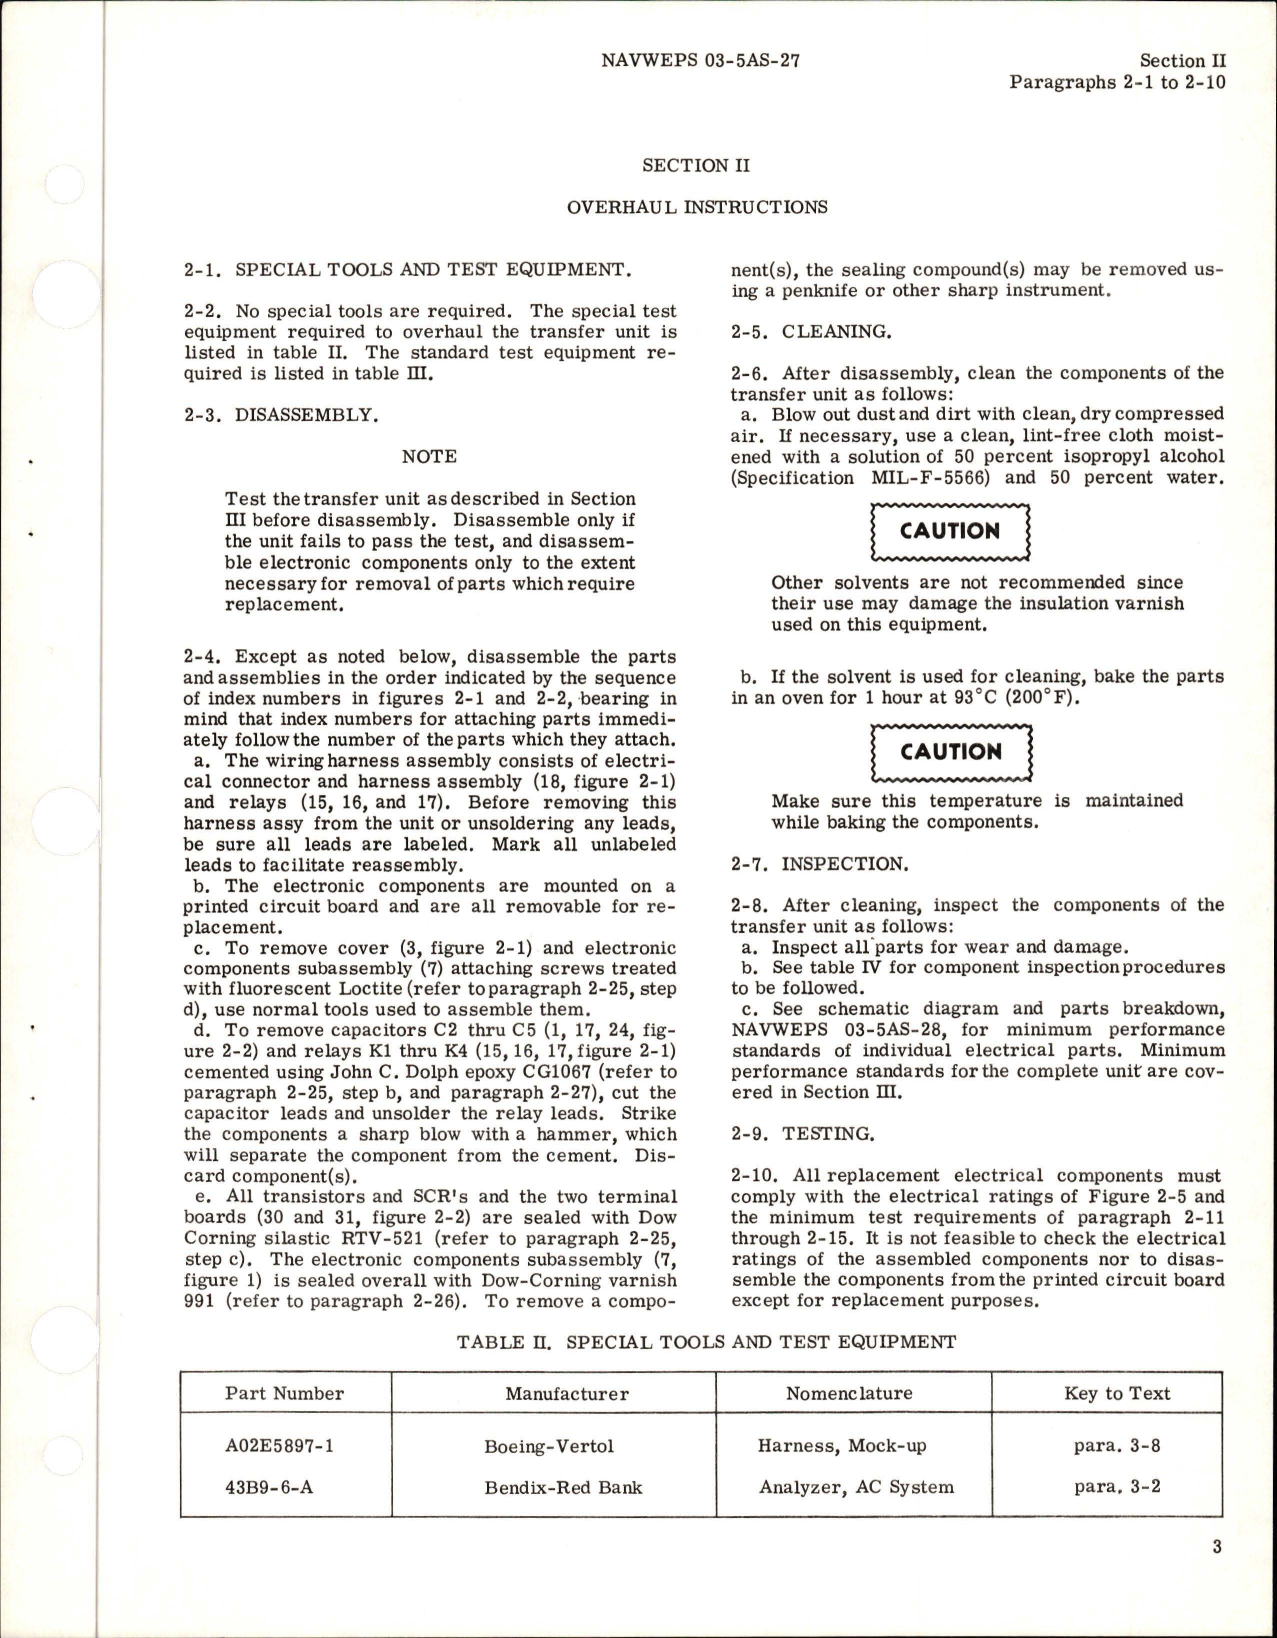 Sample page 7 from AirCorps Library document: Overhaul Instructions for Transfer Unit - Part 34B74-2-A